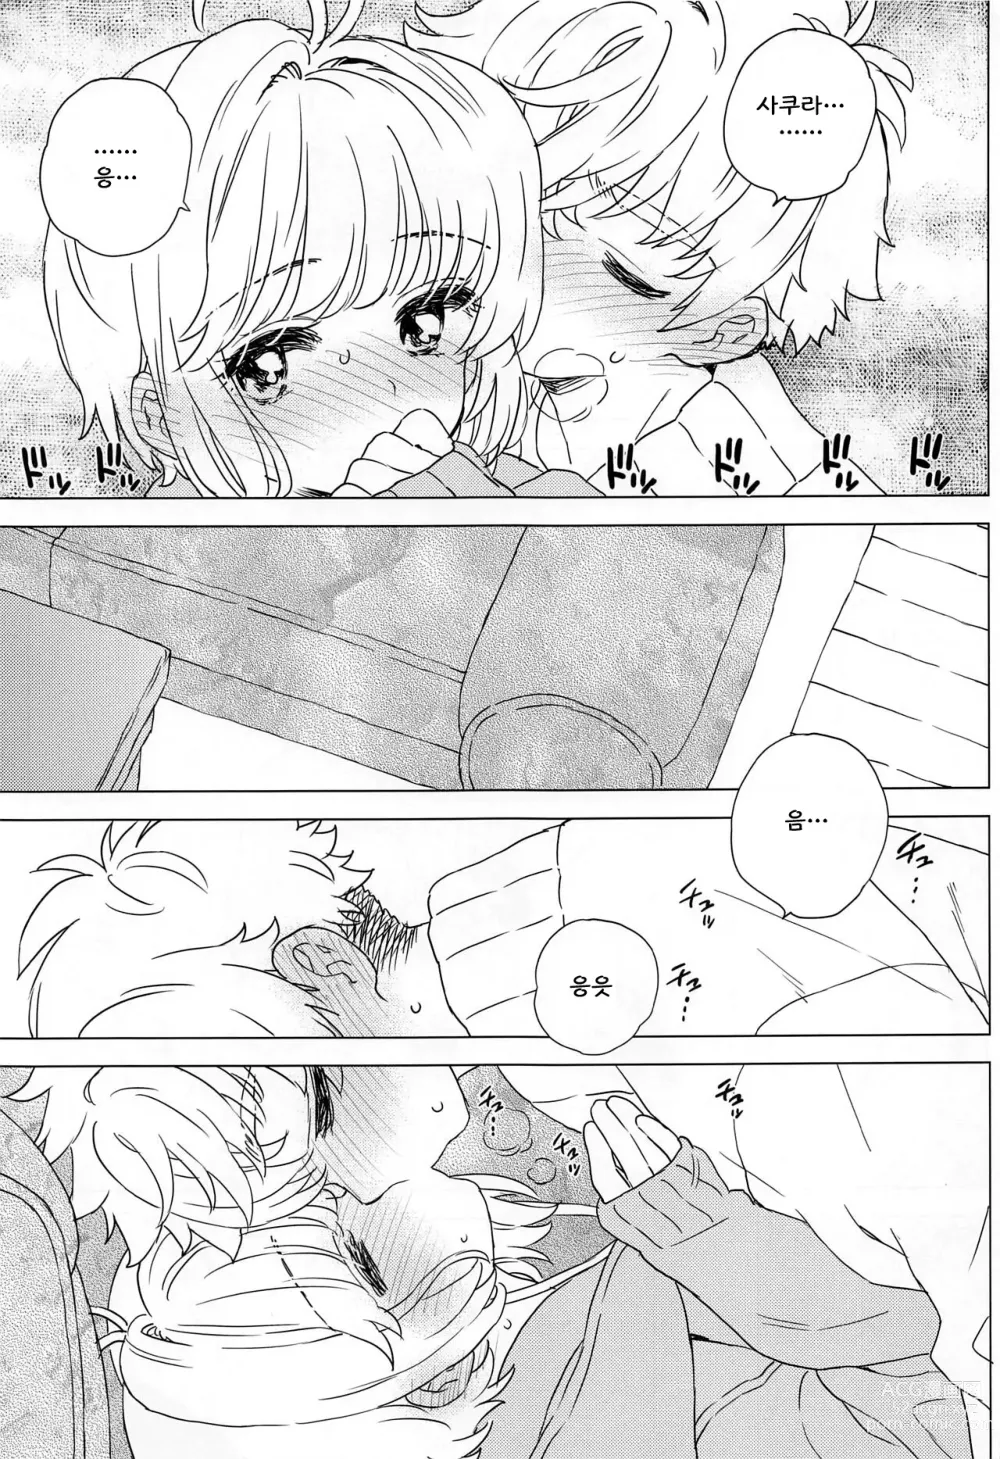 Page 14 of doujinshi 사쿠라와 샤오랑의 집 데이트